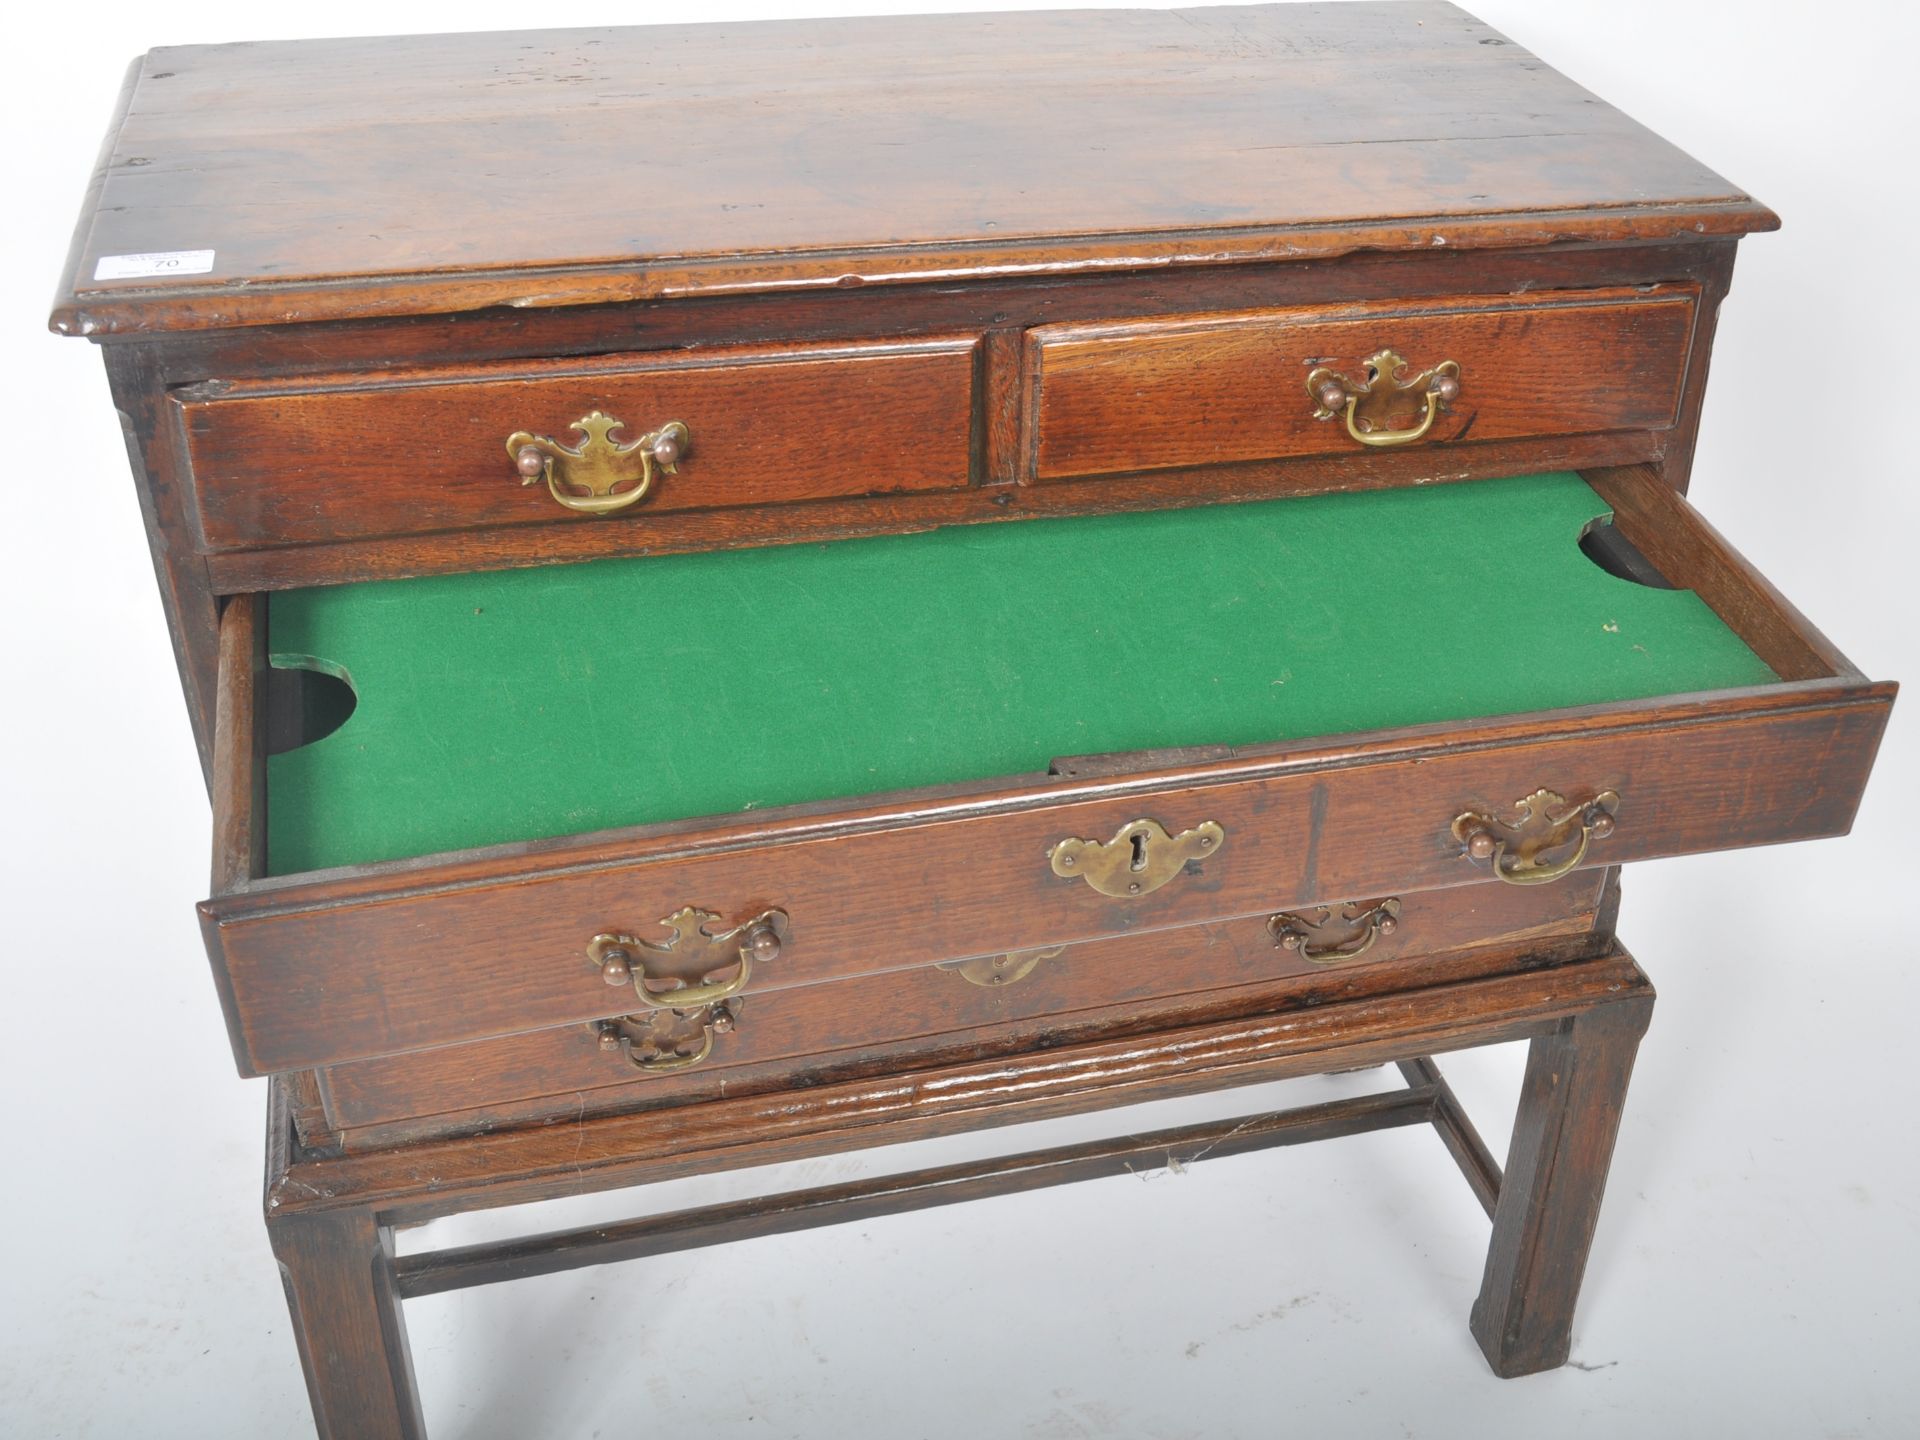 RARE 18TH CENTURY MINIATURE CHEST ON STAND - Image 5 of 9